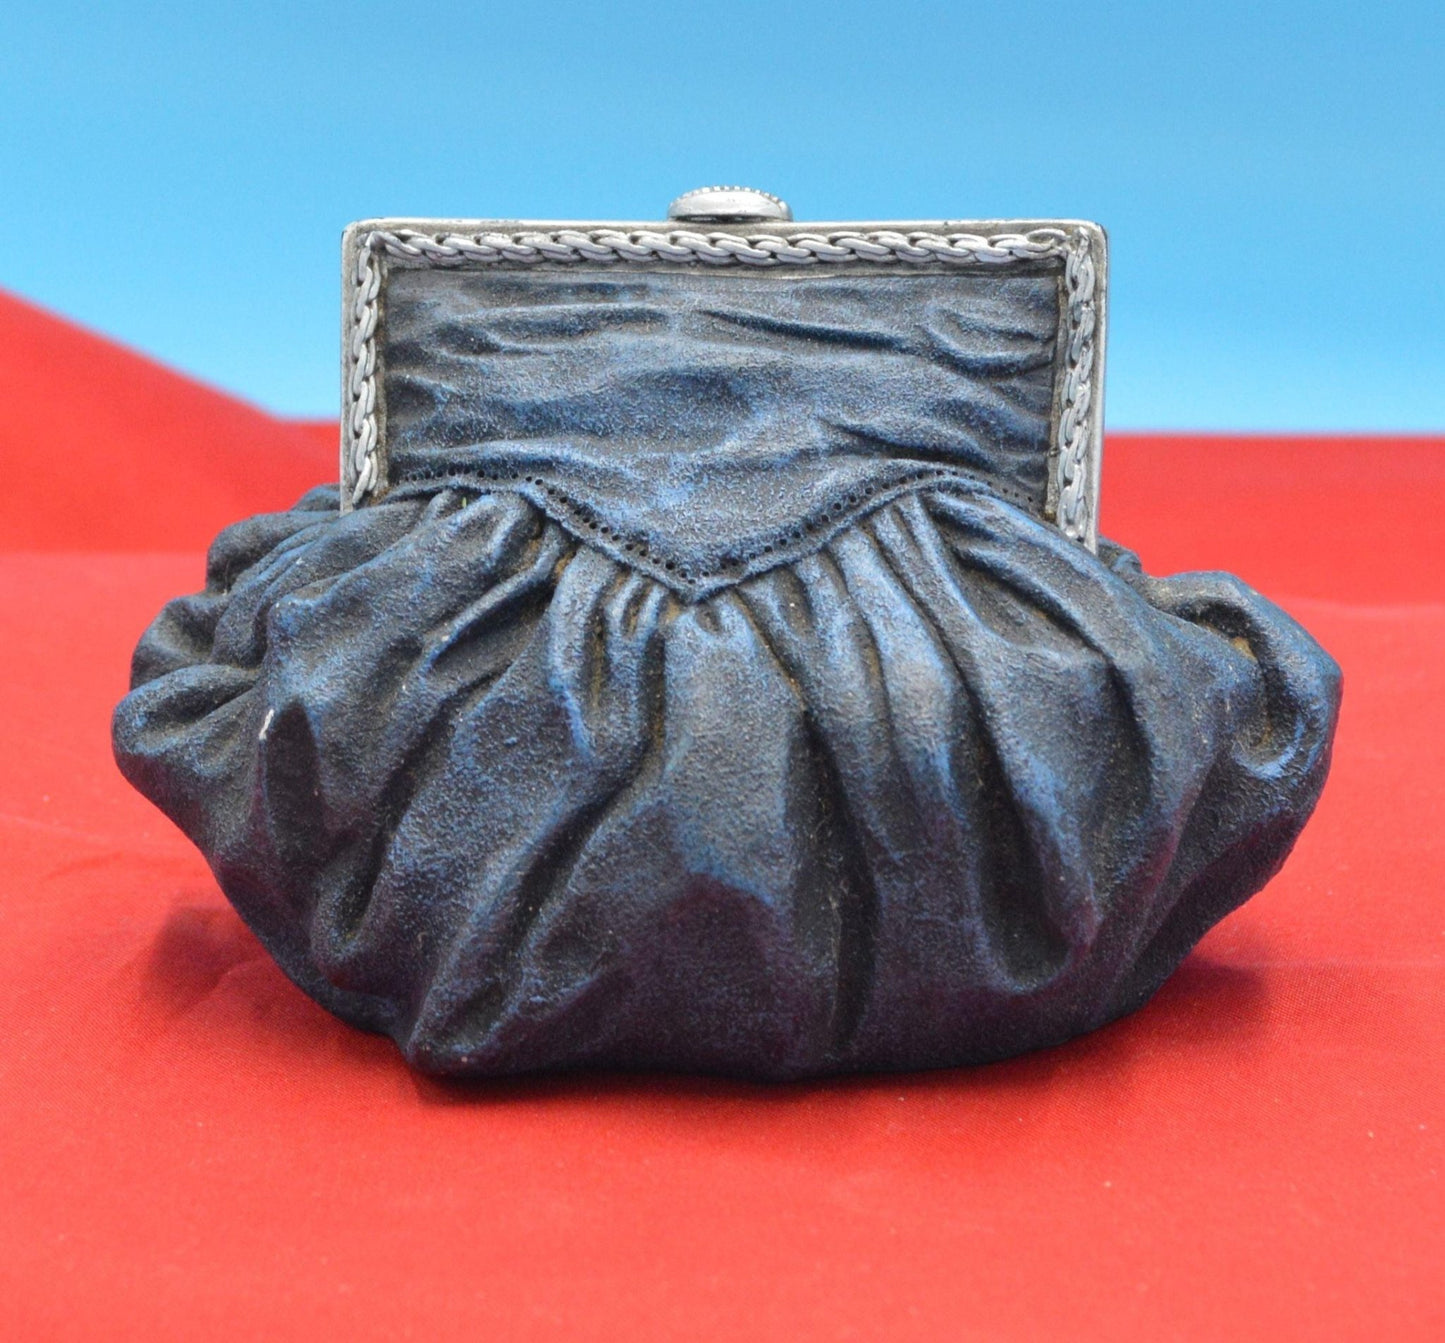 JUST THE RIGHT STYLE VELVET CRUSH MUSICAL PURSE ORNAMENT - TMD167207